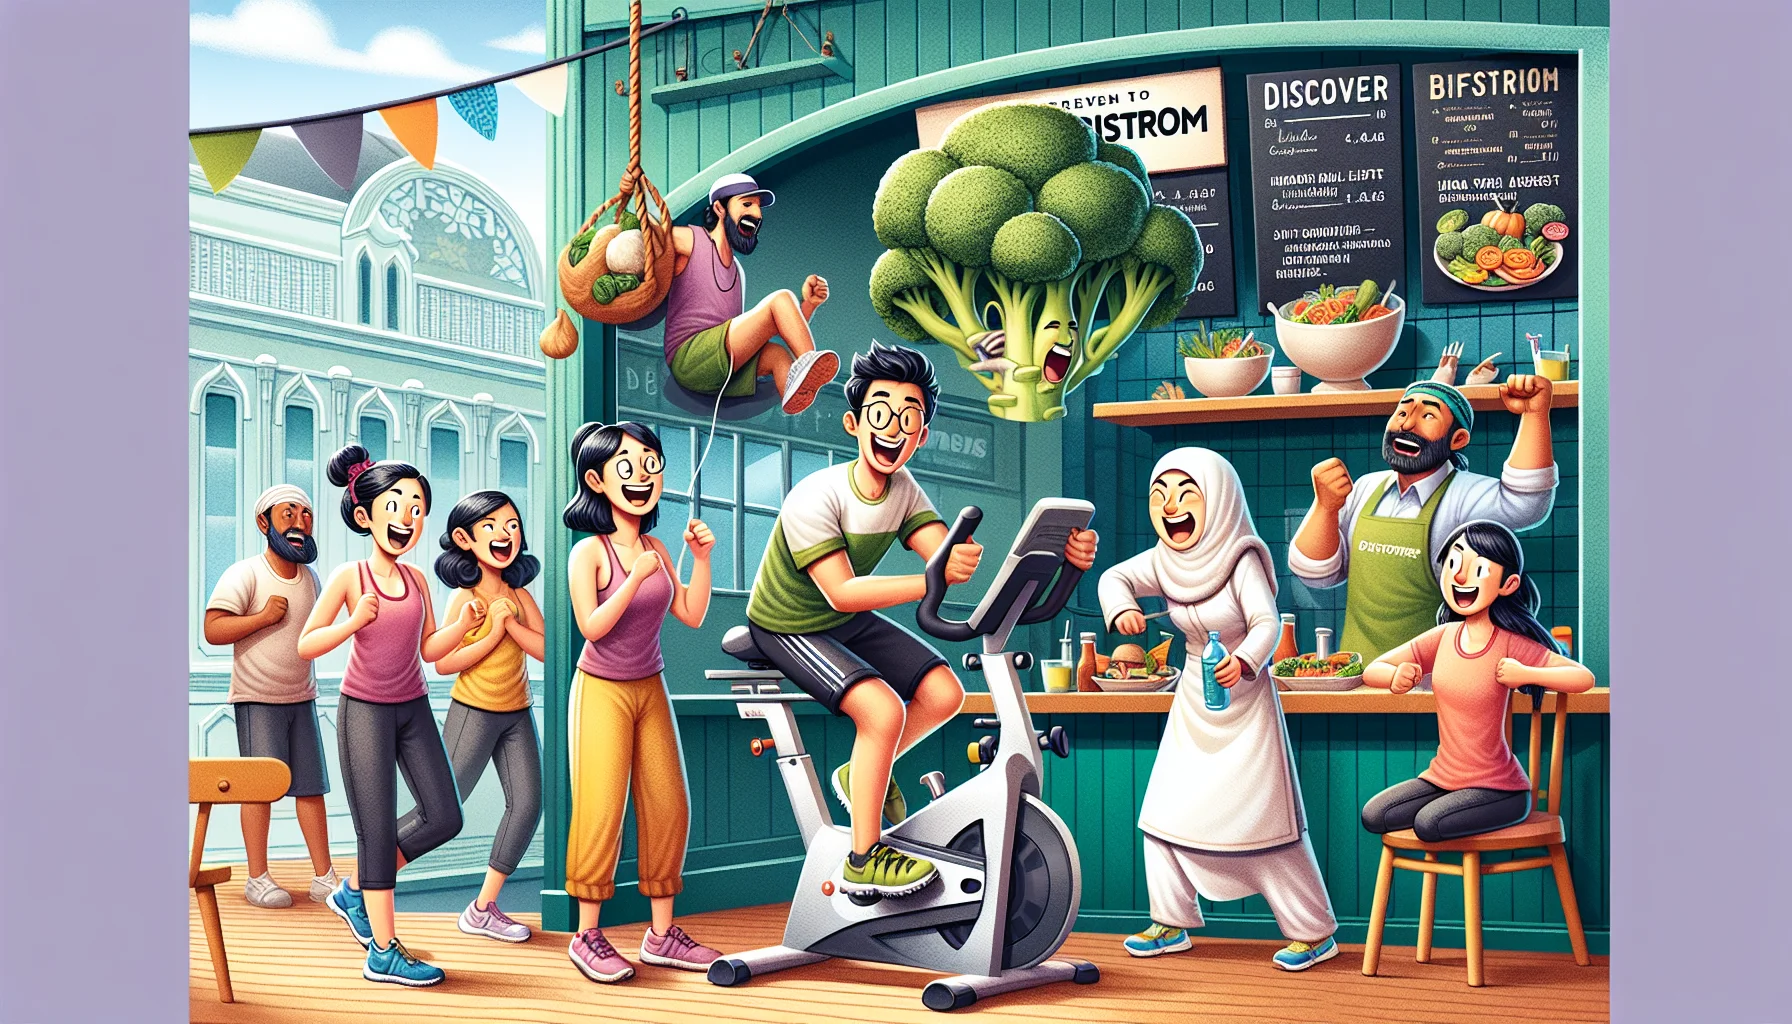 Illustrate a humorous scene portraying the benefits of healthy eating and exercise. The setting is a vibrant café named 'Discover BistroMD', which prides itself on a menu filled with nutritious options. In this establishment, a diverse group of people are engaged in lively workouts. A South Asian woman is energetically pedaling an exercise bike, while a Middle Eastern man is amusingly attempting to lift a large broccoli stalk as if it were a weight. Everyone is firmly engrossed in their activities, laughing and encouraging one another, demonstrating the enjoyable side of a wellness-focused lifestyle.